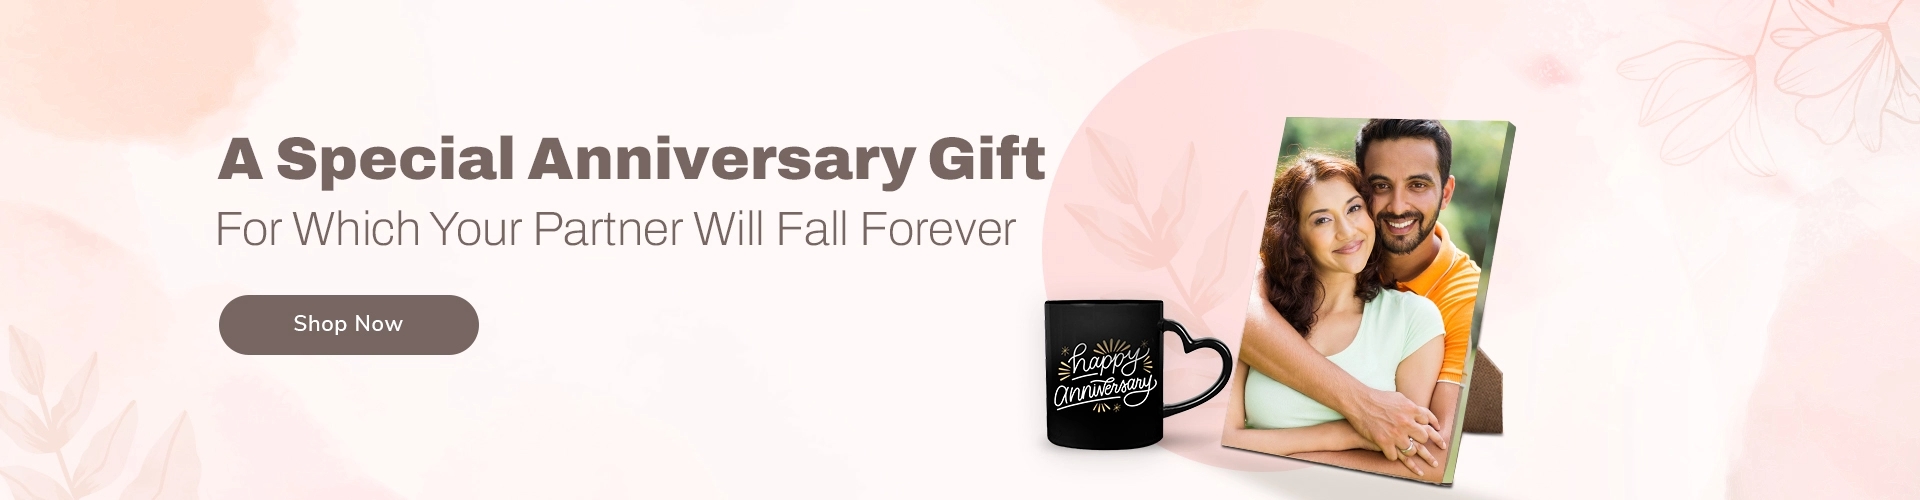 A Special Anniversary Gift